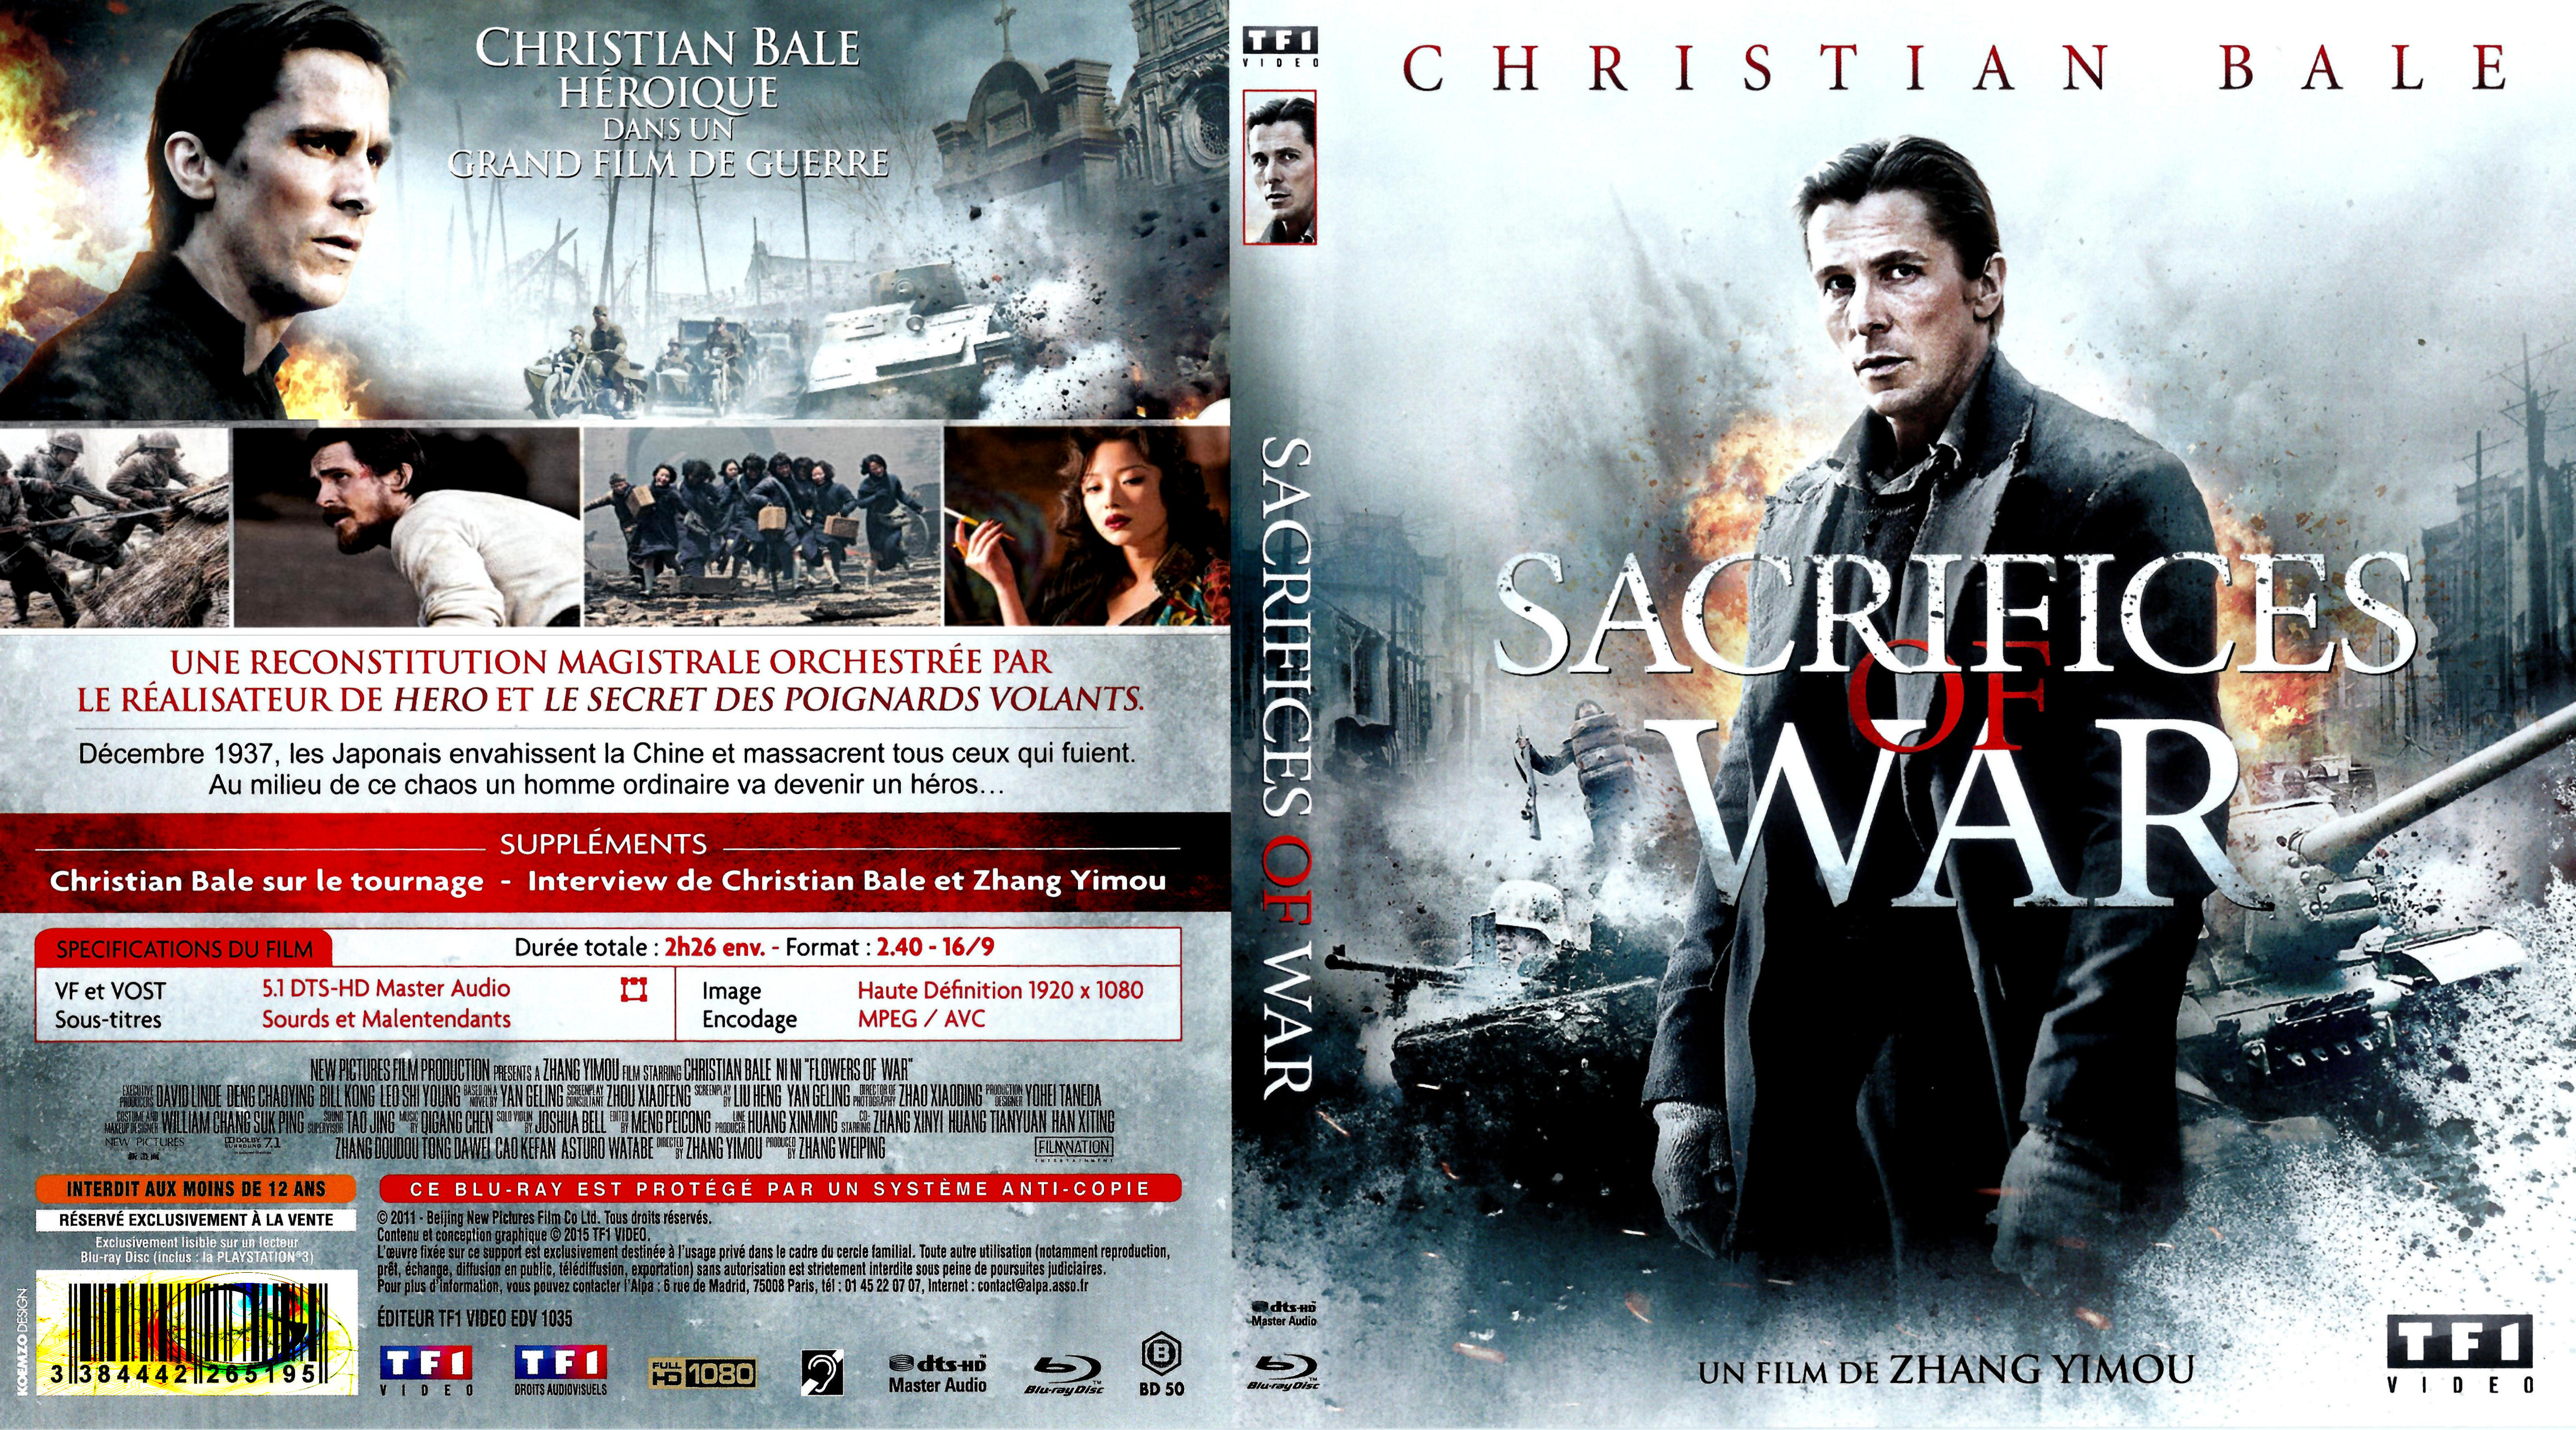 Jaquette DVD Sacrifices of war (BLU-RAY)